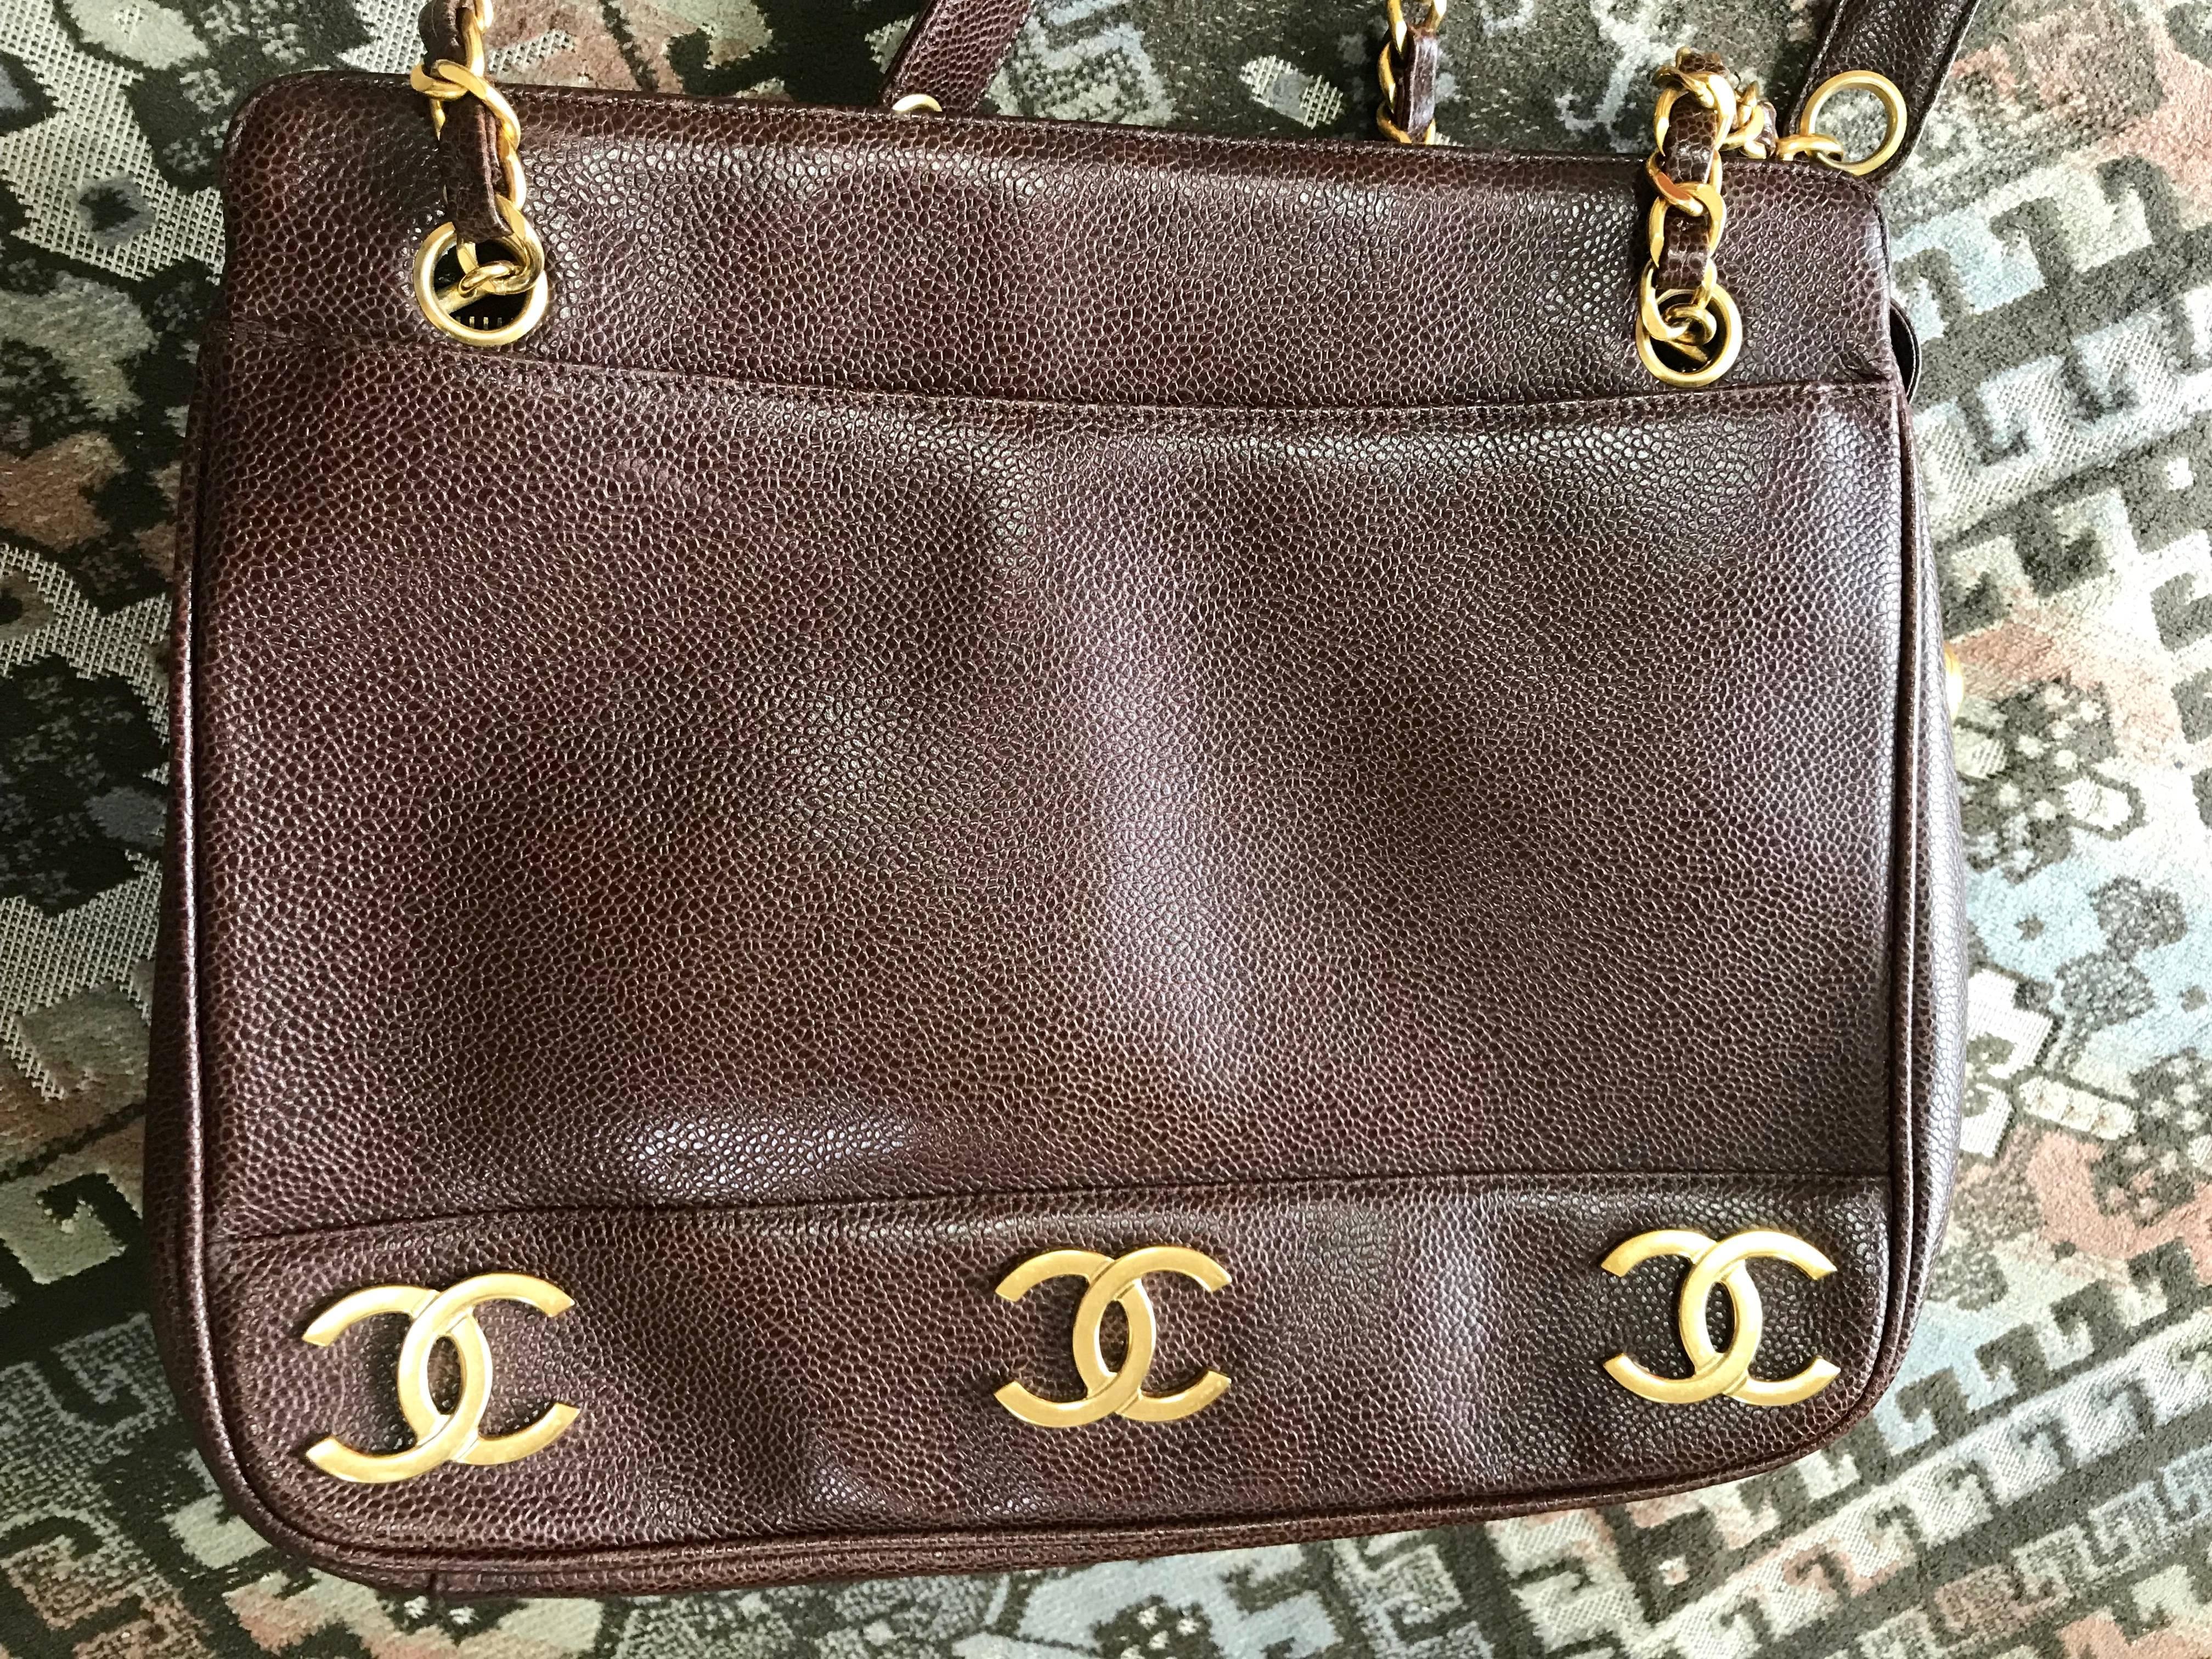 Women's Vintage CHANEL brown caviar leather chain shoulder bag with 3 golden CC marks. For Sale